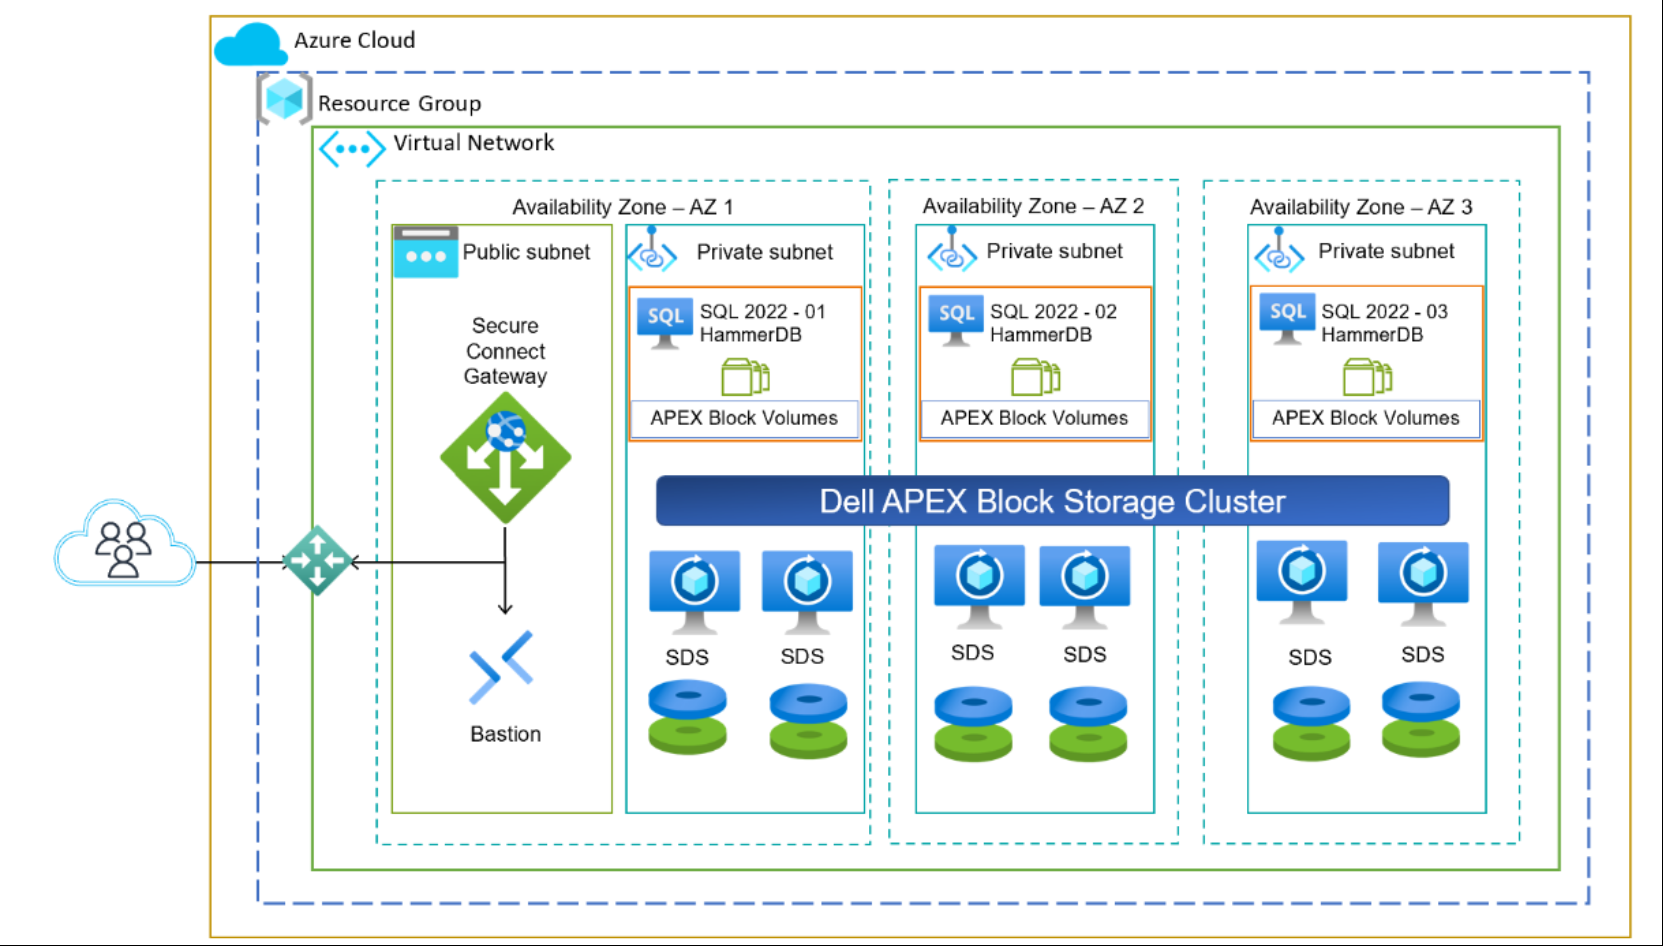 This figure represents the two-layer APEX Block Storage system using the Azure VMs local NVMe disks.